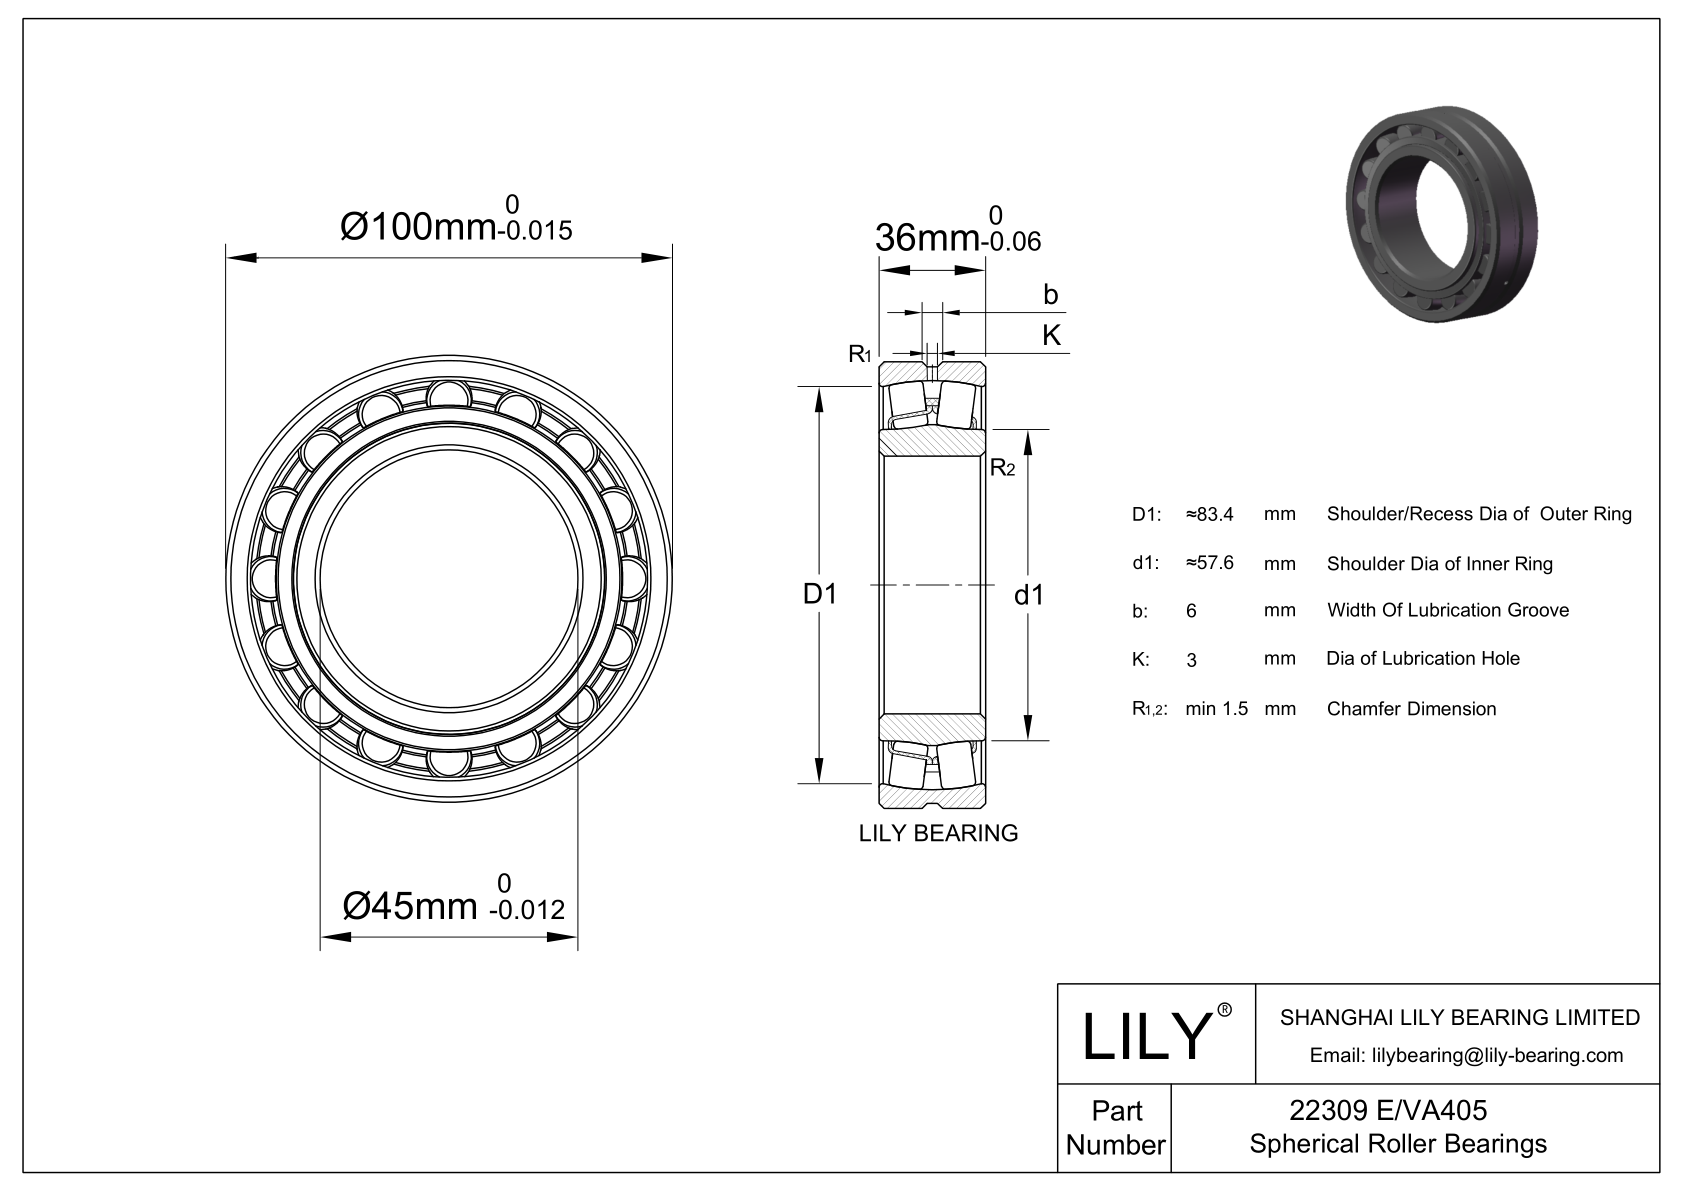 22309 E/VA405 Double Row Spherical Roller Bearing cad drawing